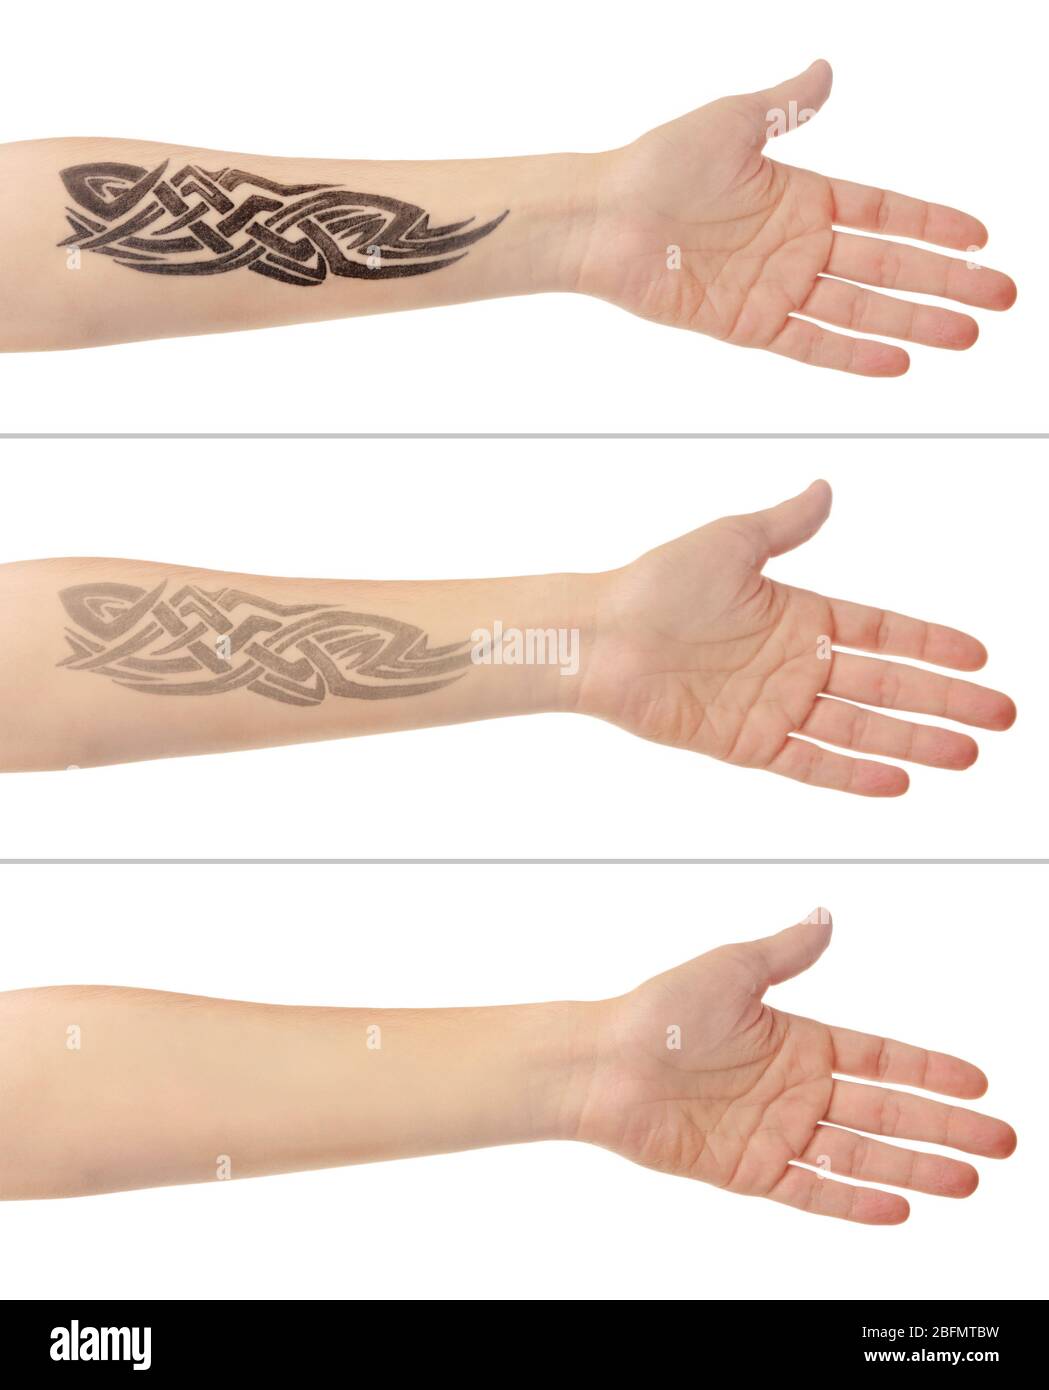 Top Armband Tattoo Designs - Find Your Perfect Ink! (68 Ideas) | Inkbox™